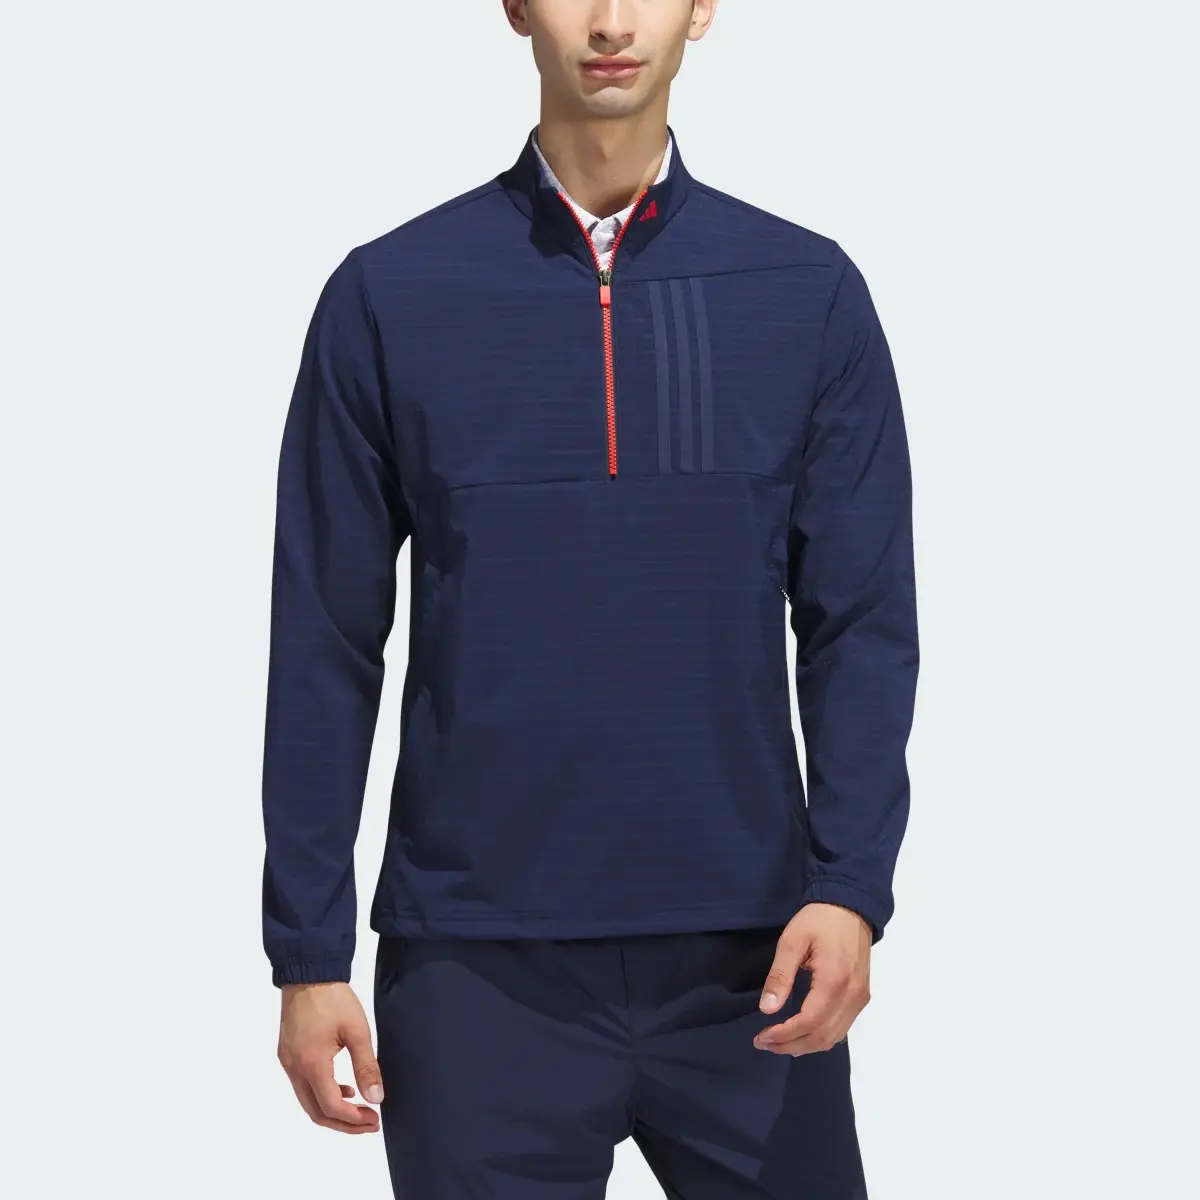 Adidas Ultimate365 Tour WIND.RDY Half-Zip Pullover. 1